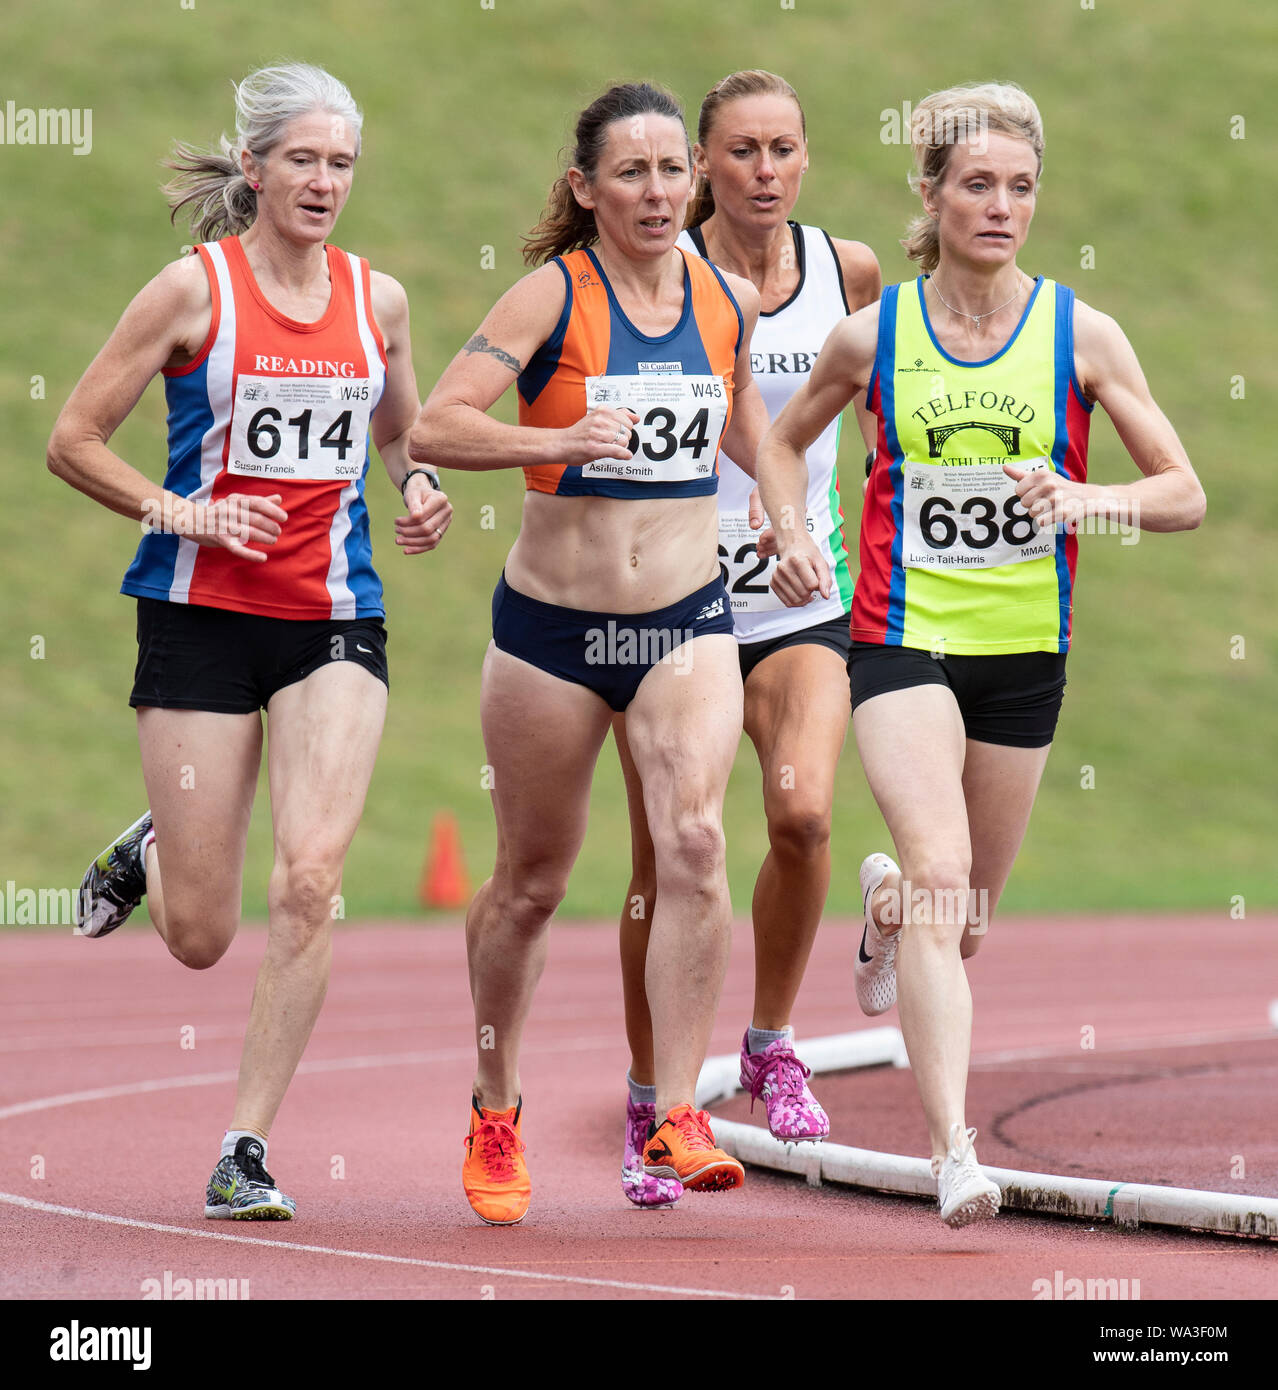 BIRMINGHAM - ENGLAND 10 AUG 2019: L-R Susan Francis (614) Ashling Smith (634) Tracy Hinxman (621) Lucie Tait-Harris (638) W45 competing in the 1500m o Stock Photo